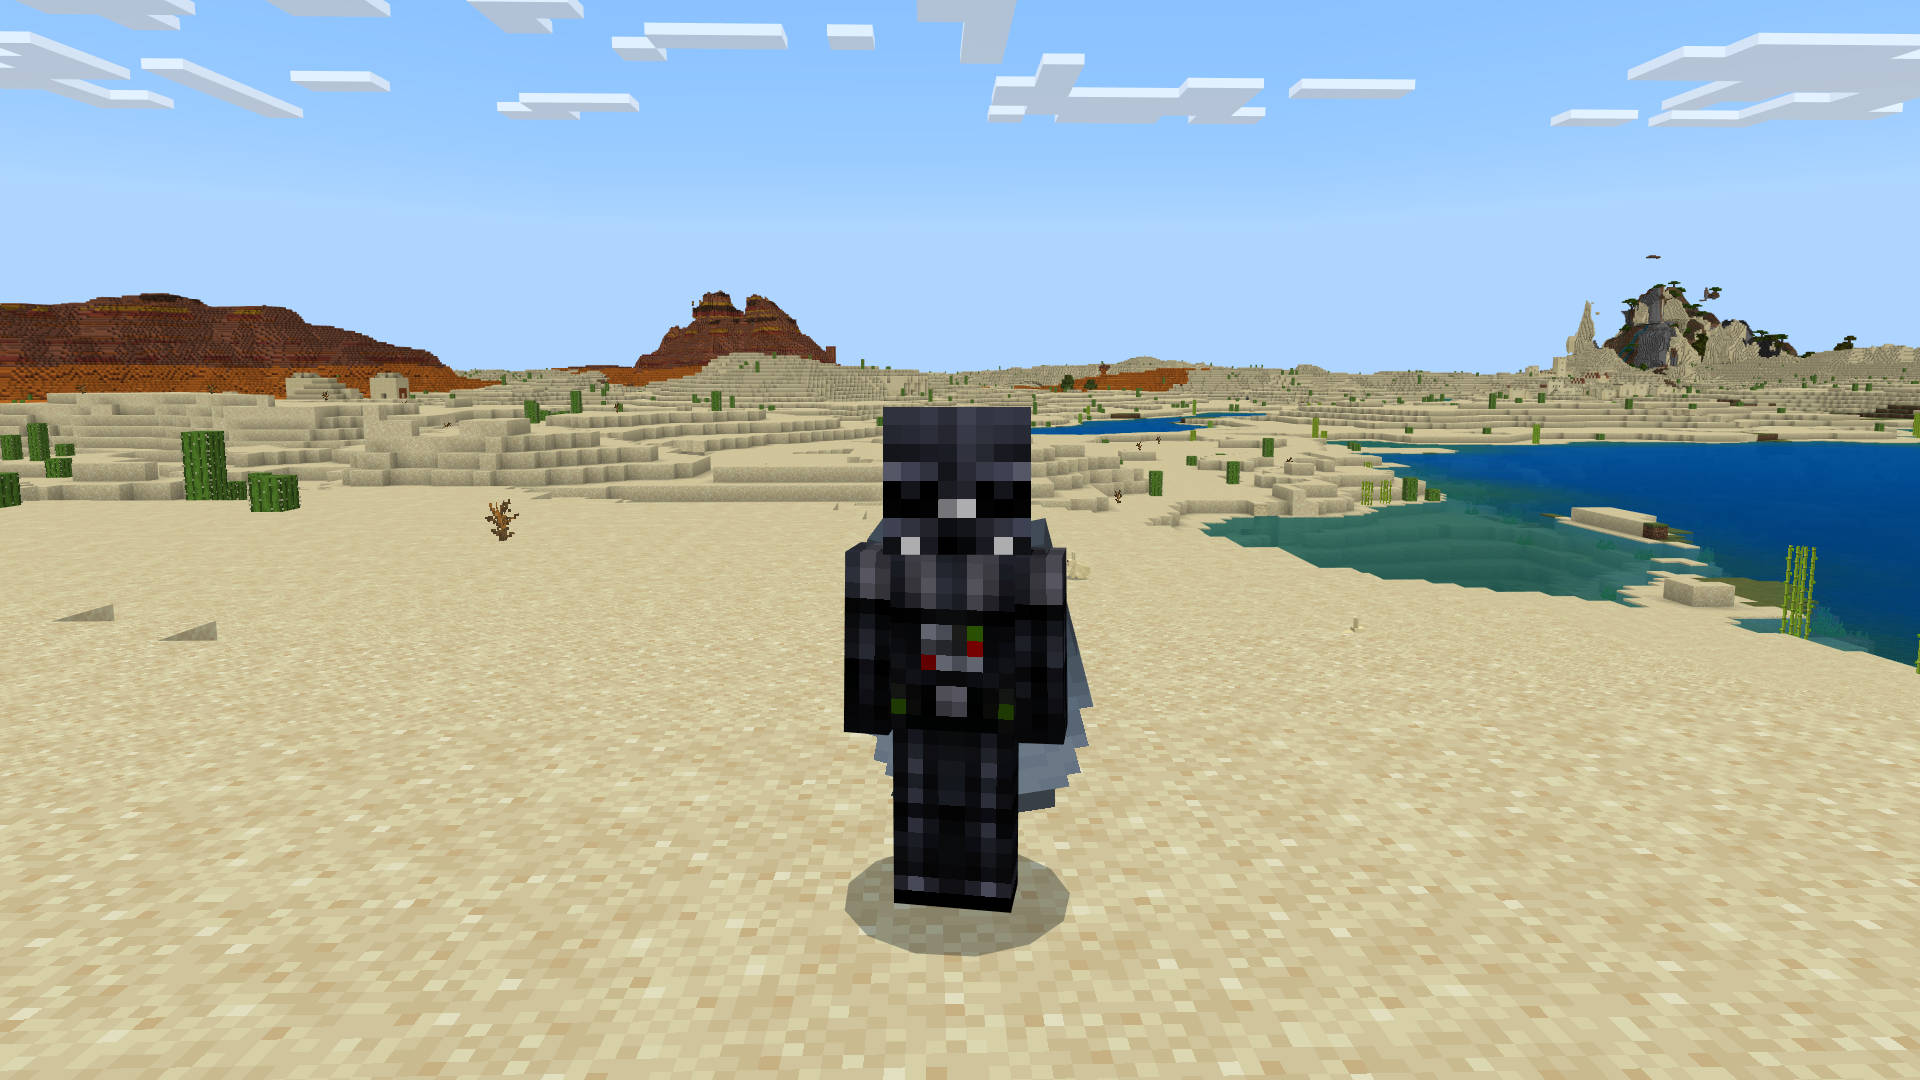 Best Minecraft skins: Darth Vader is standing on a beach near some mountains.